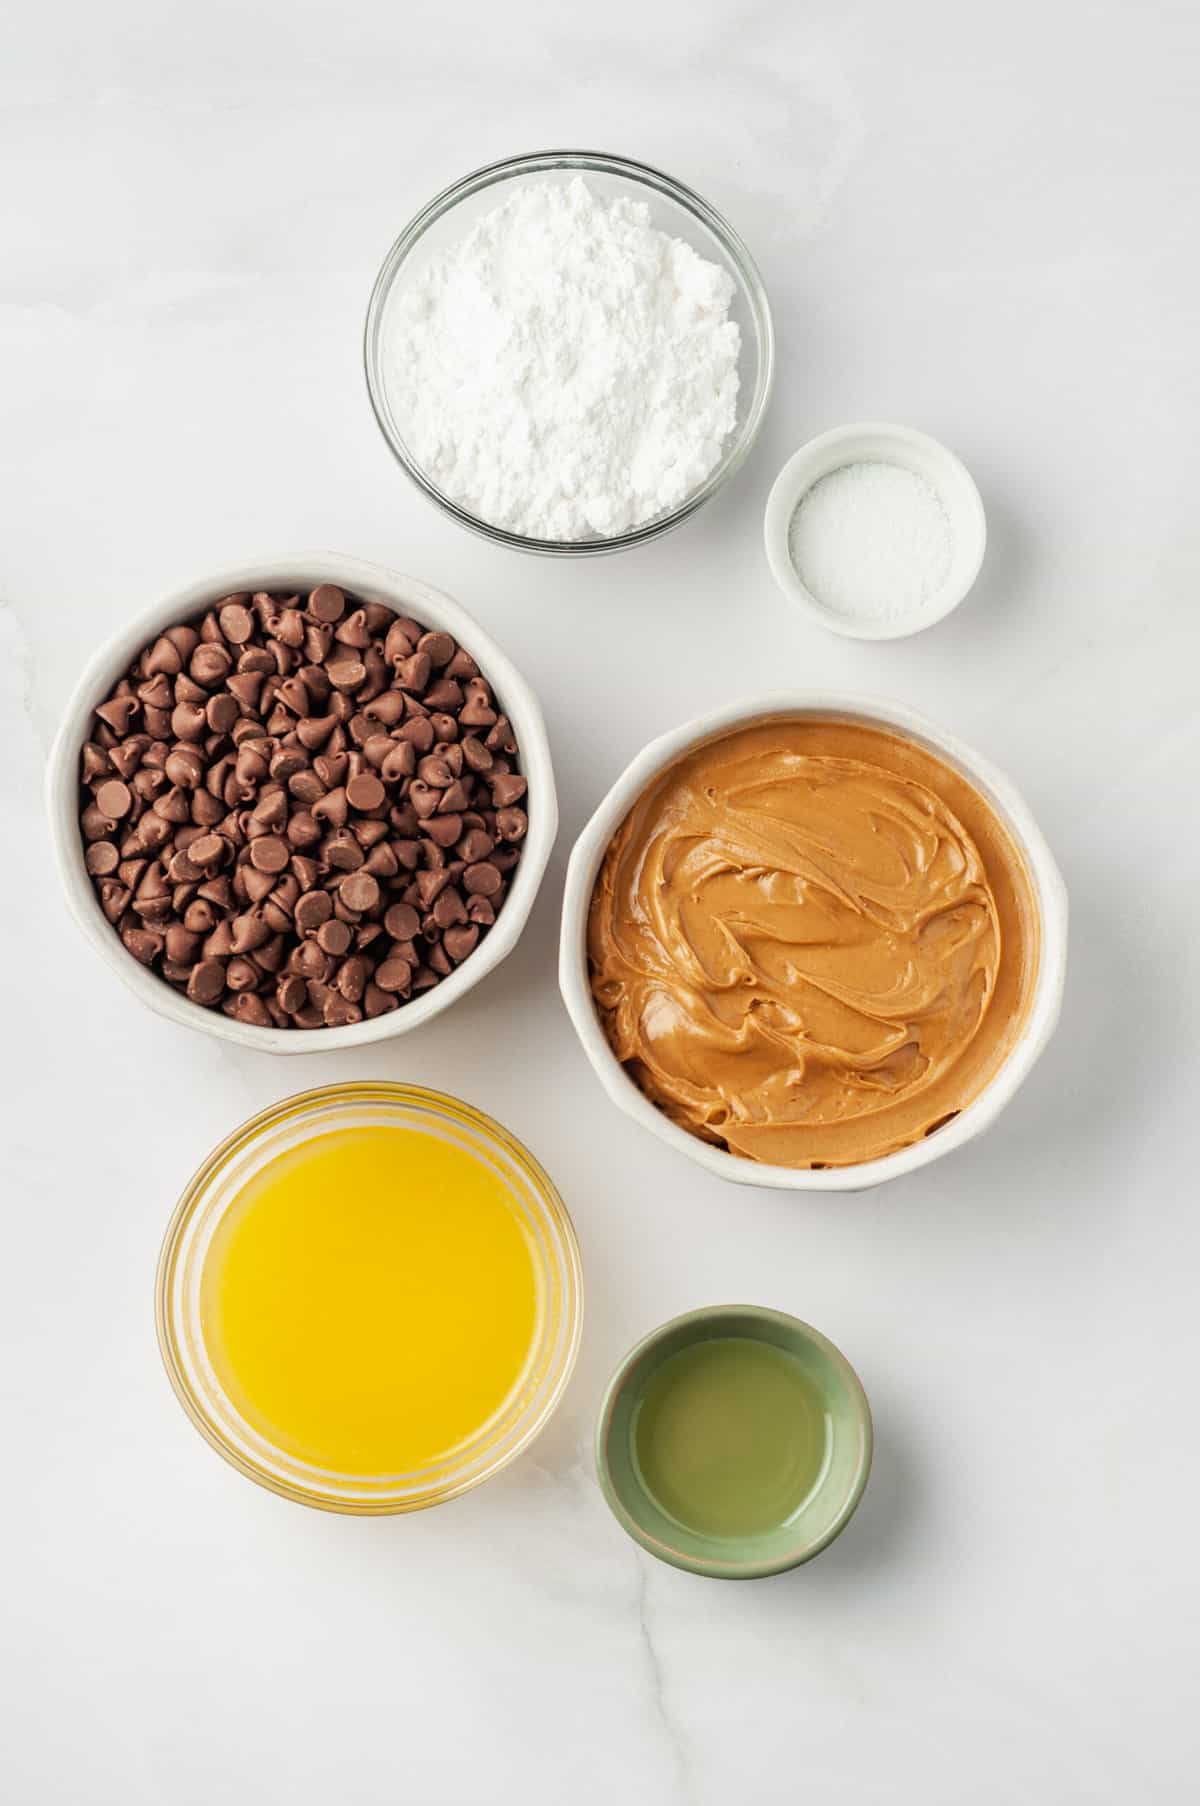 The ingredients to make Reese's peanut butter cup pie are shown portioned out on a white background: peanut butter, butter, chocolate chips, powdered sugar, salt.